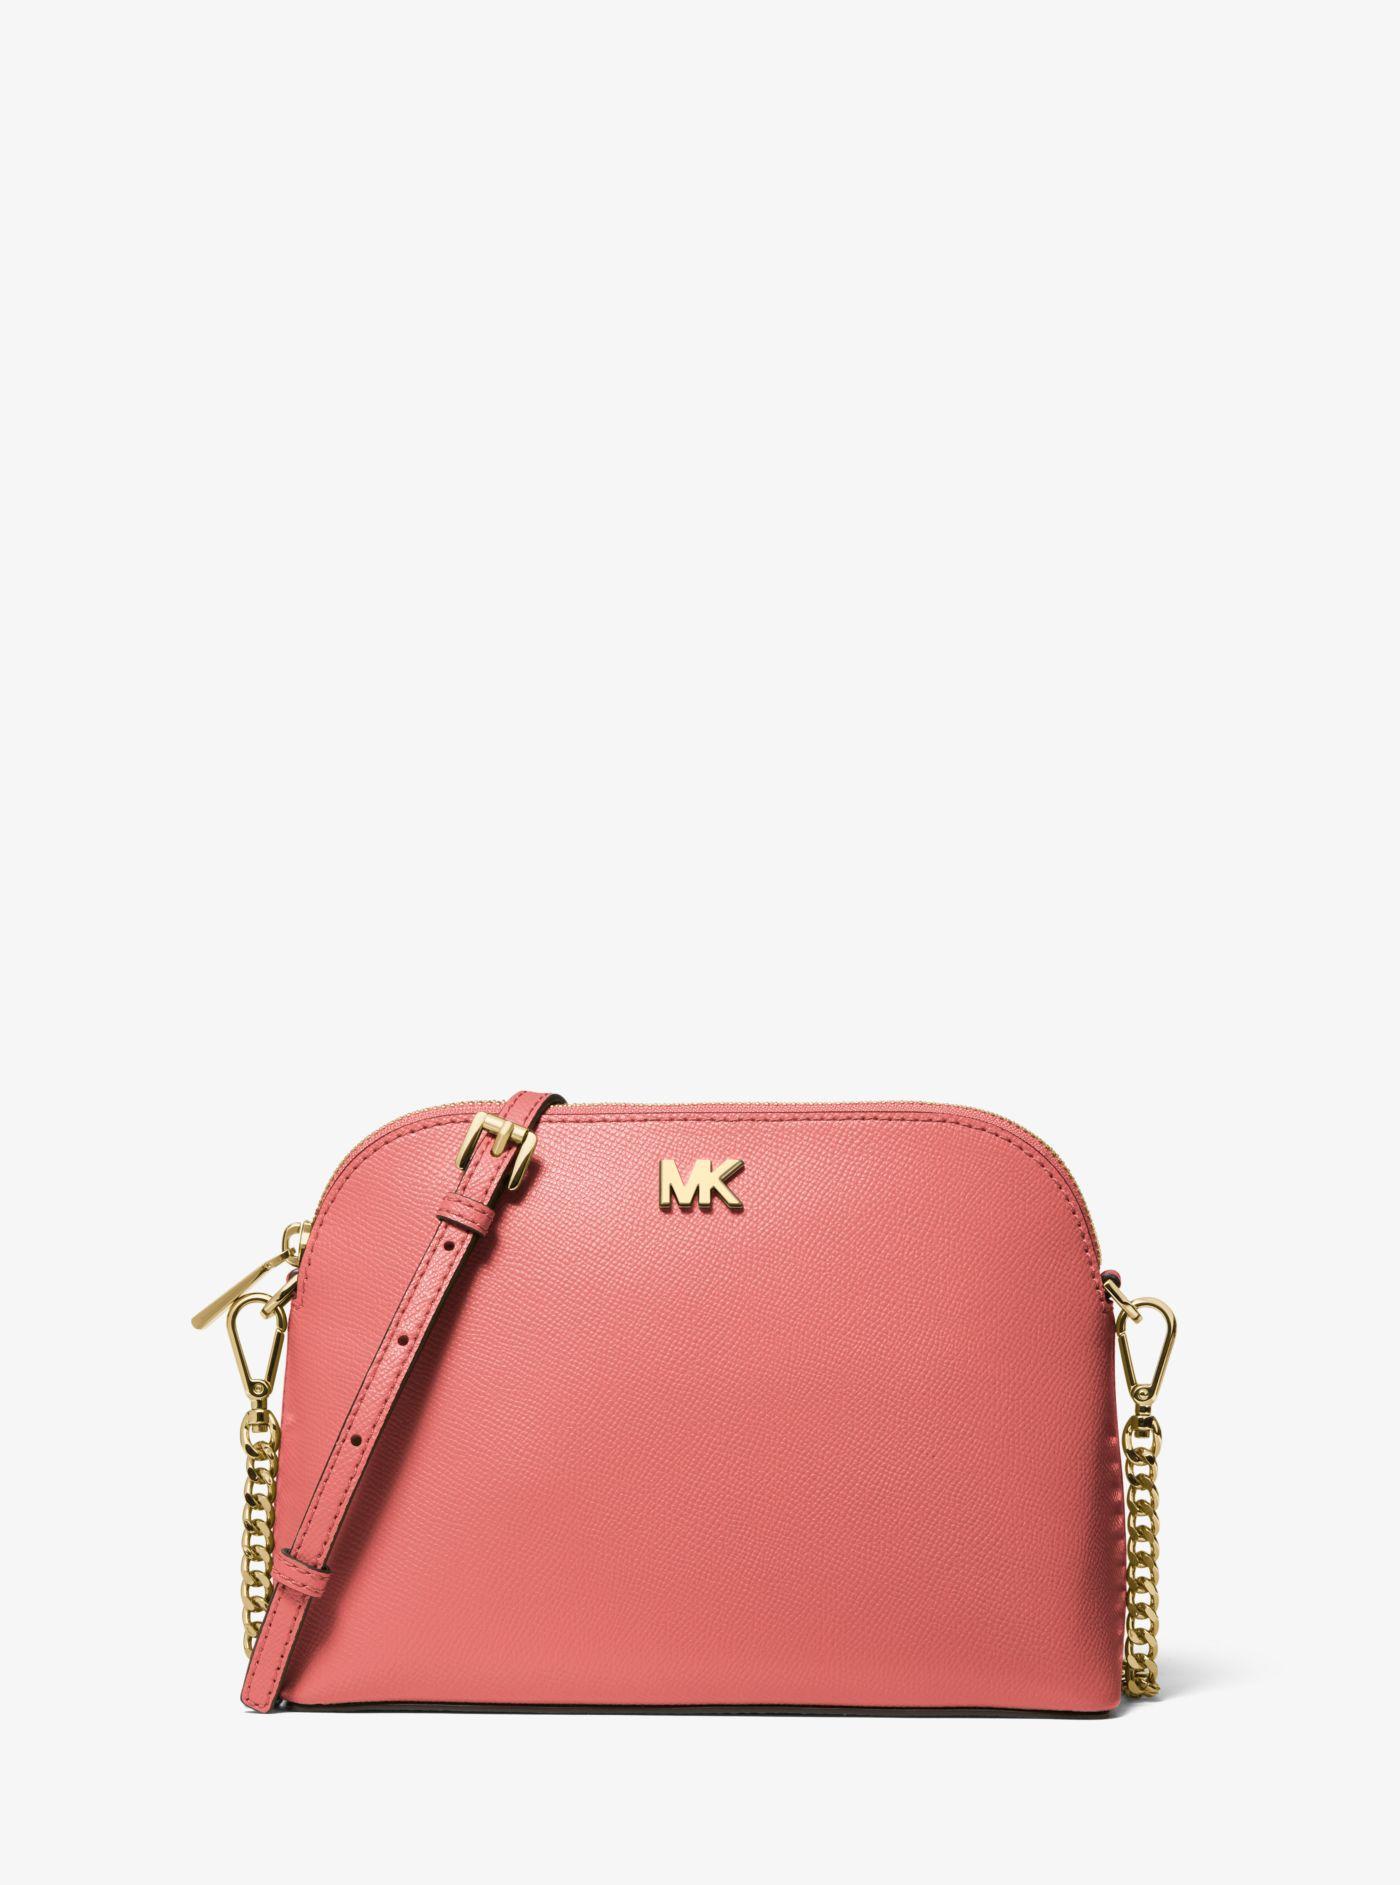 Michael Kors Large Crossgrain Leather Dome Crossbody Bag in Pink | Lyst